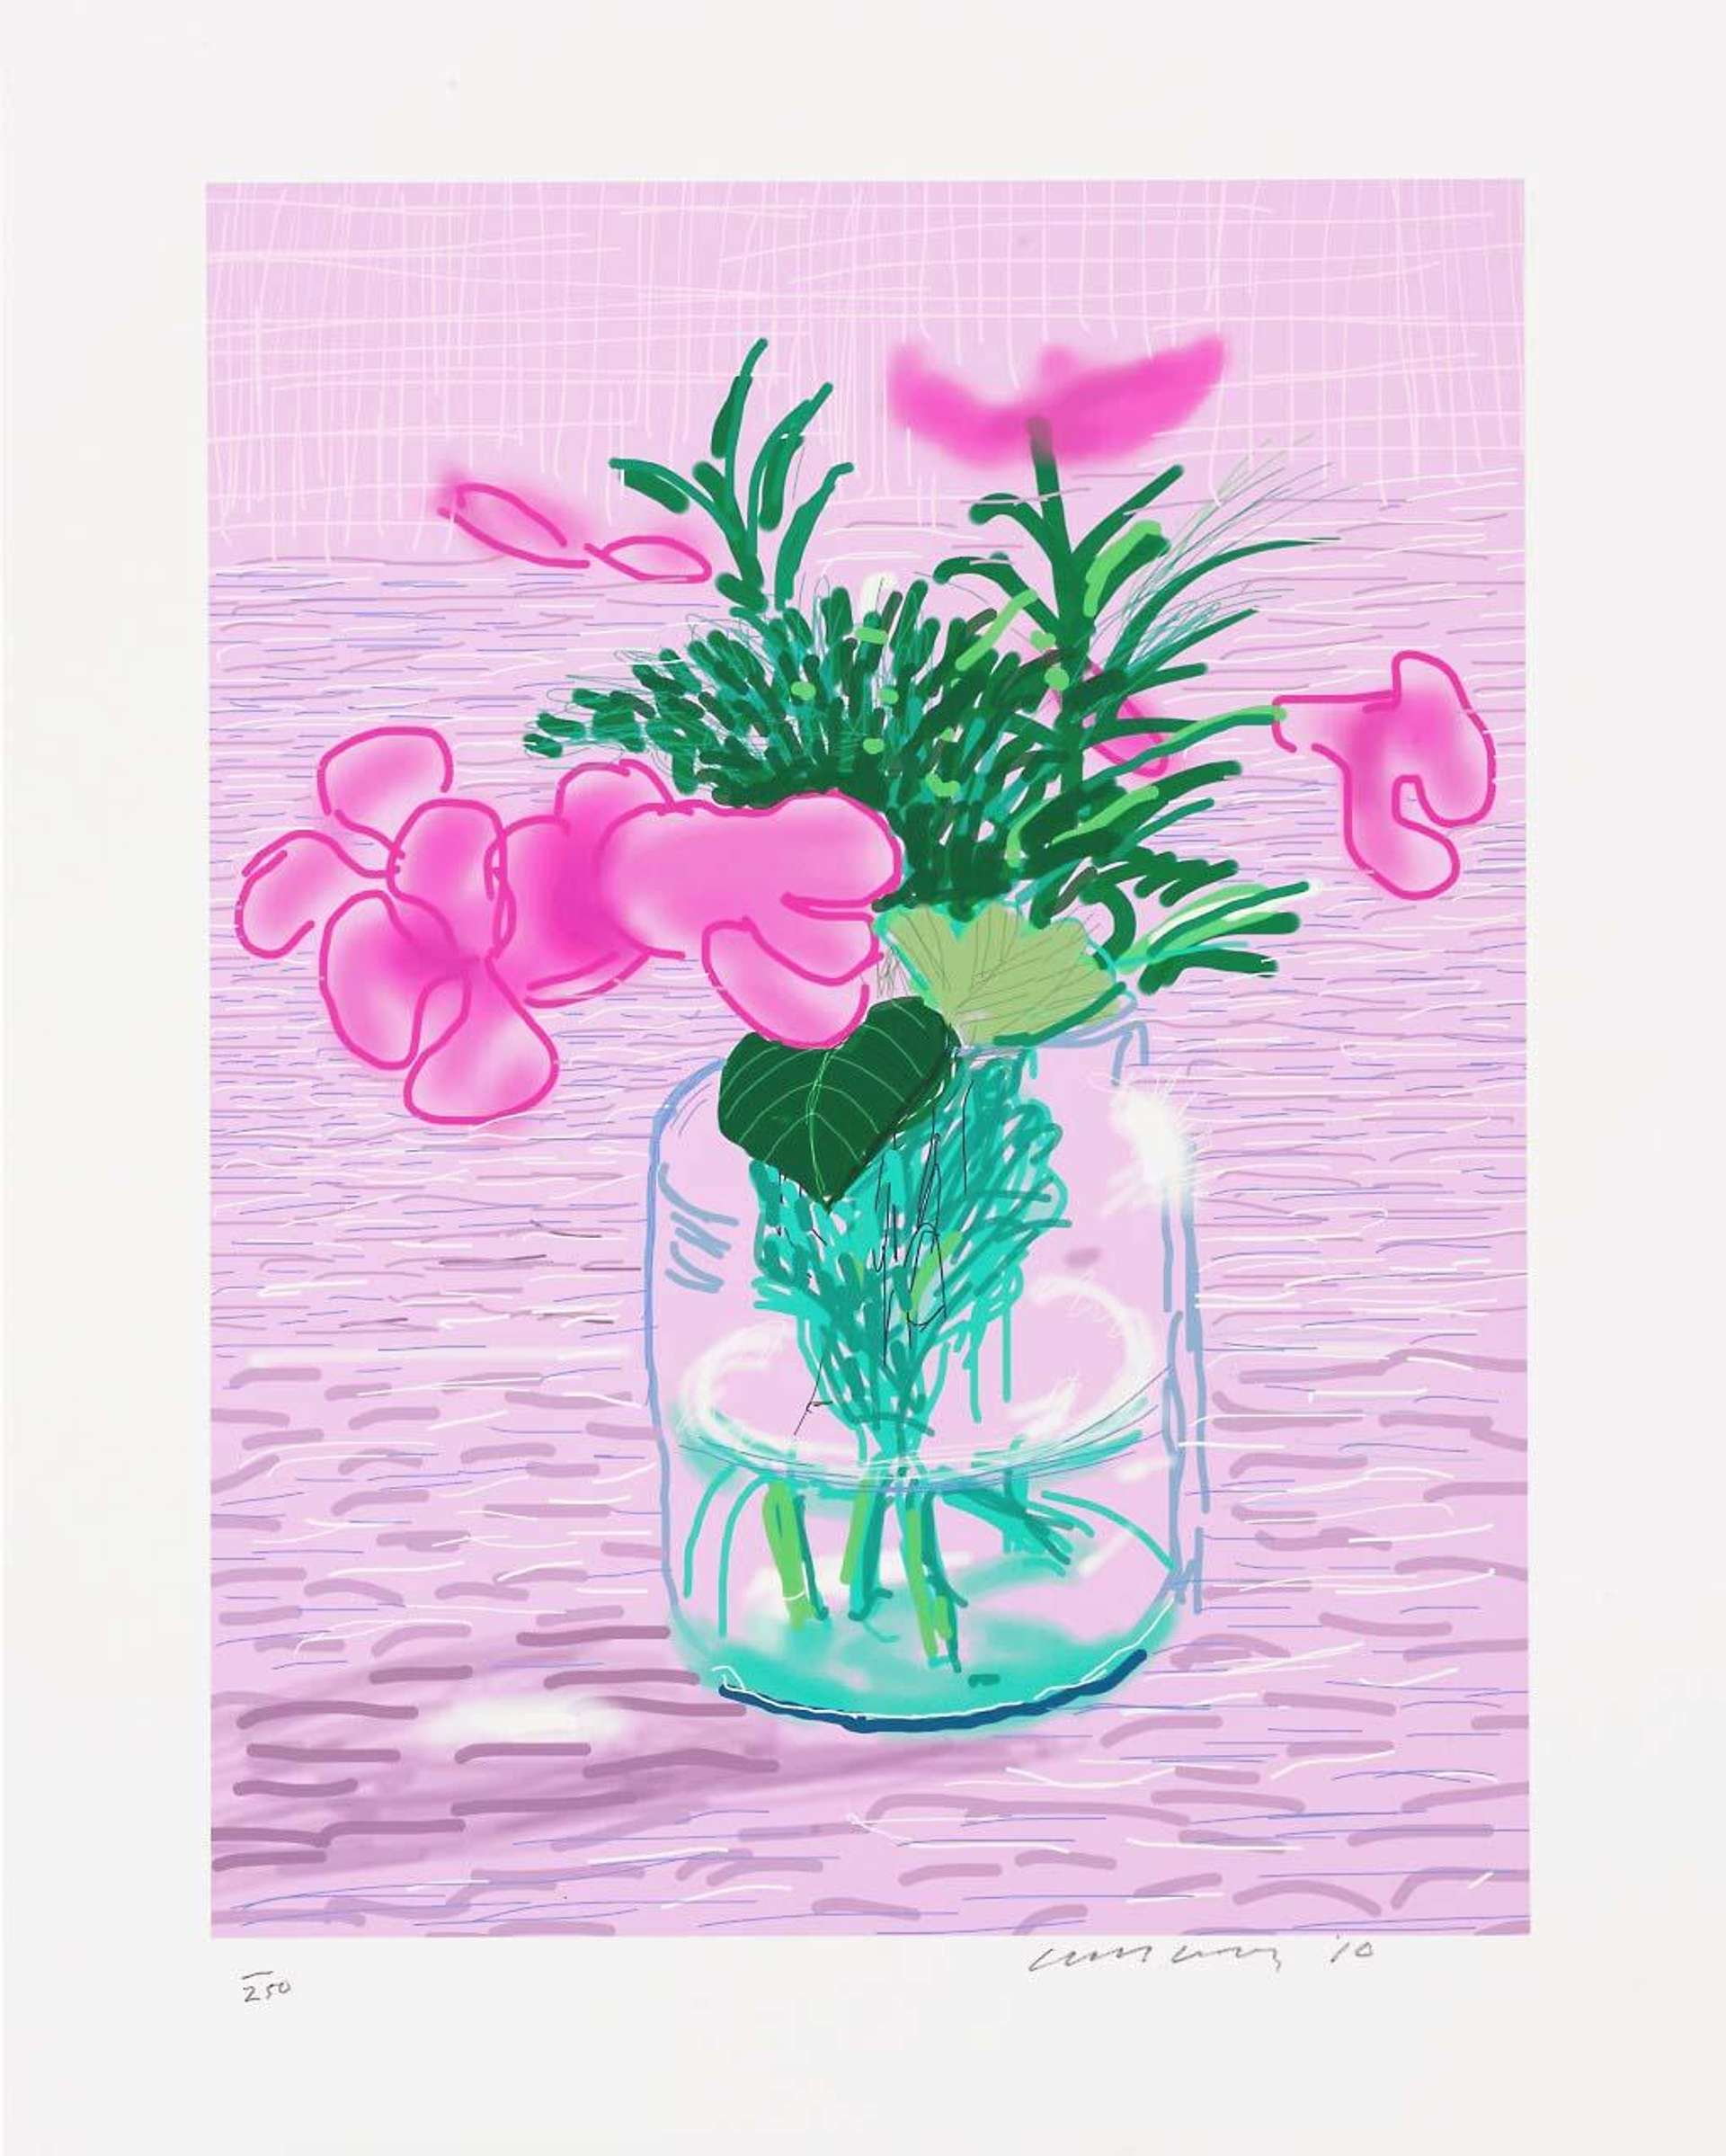 A printed iPad drawing by David Hockney depicting a bouquet of pink flowers and grasses in a small glass vase, set against a pink and lilac background.